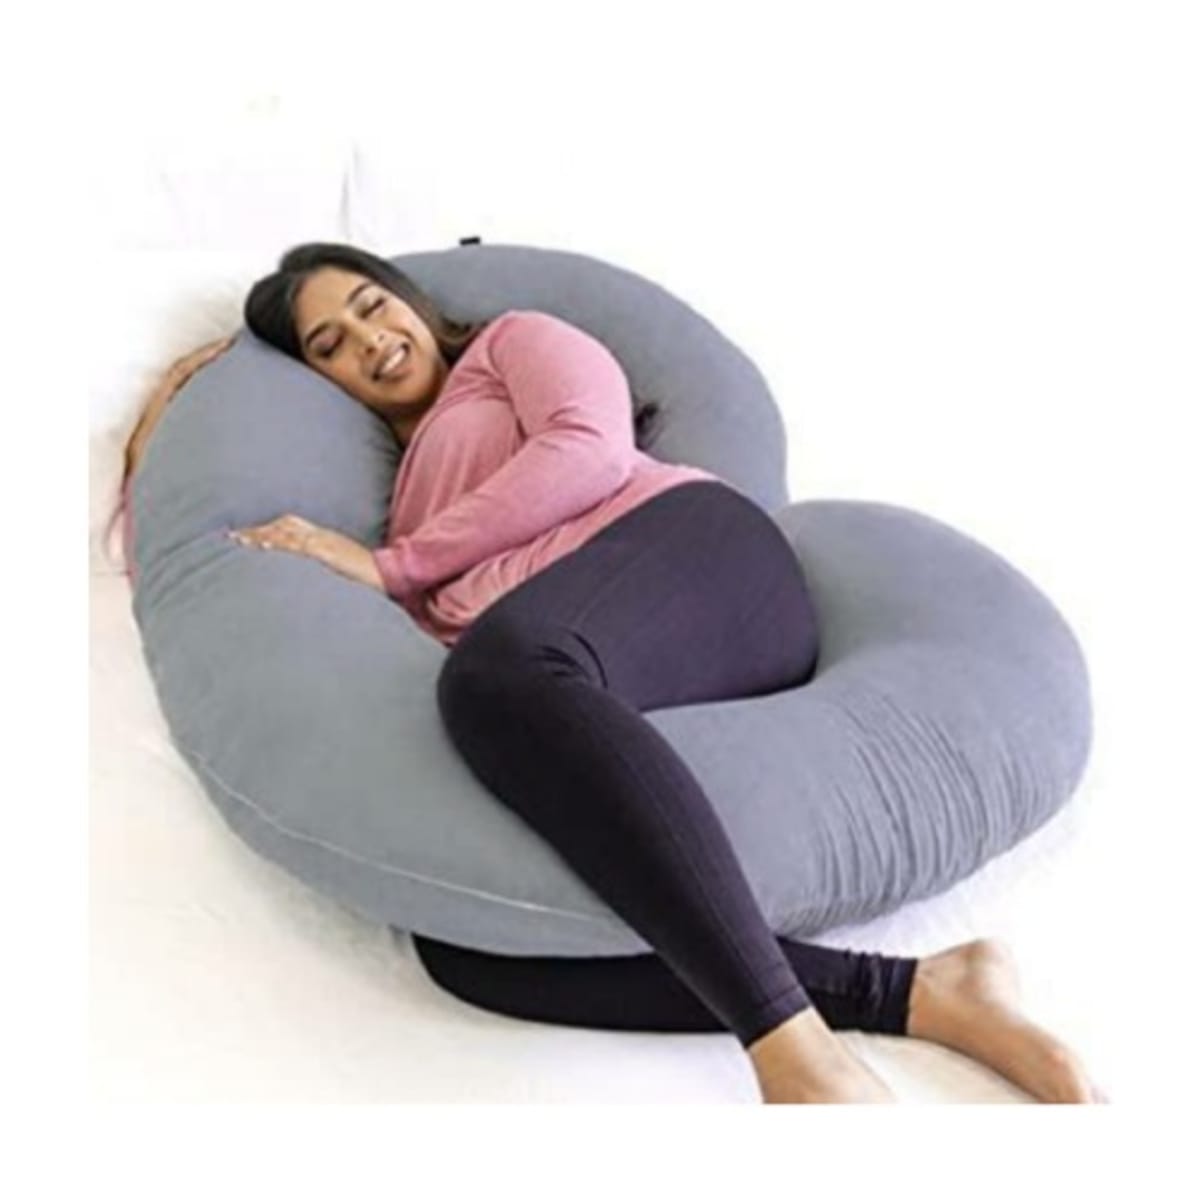 EverBeaming Full Body Pregnancy And Maternity Pillow